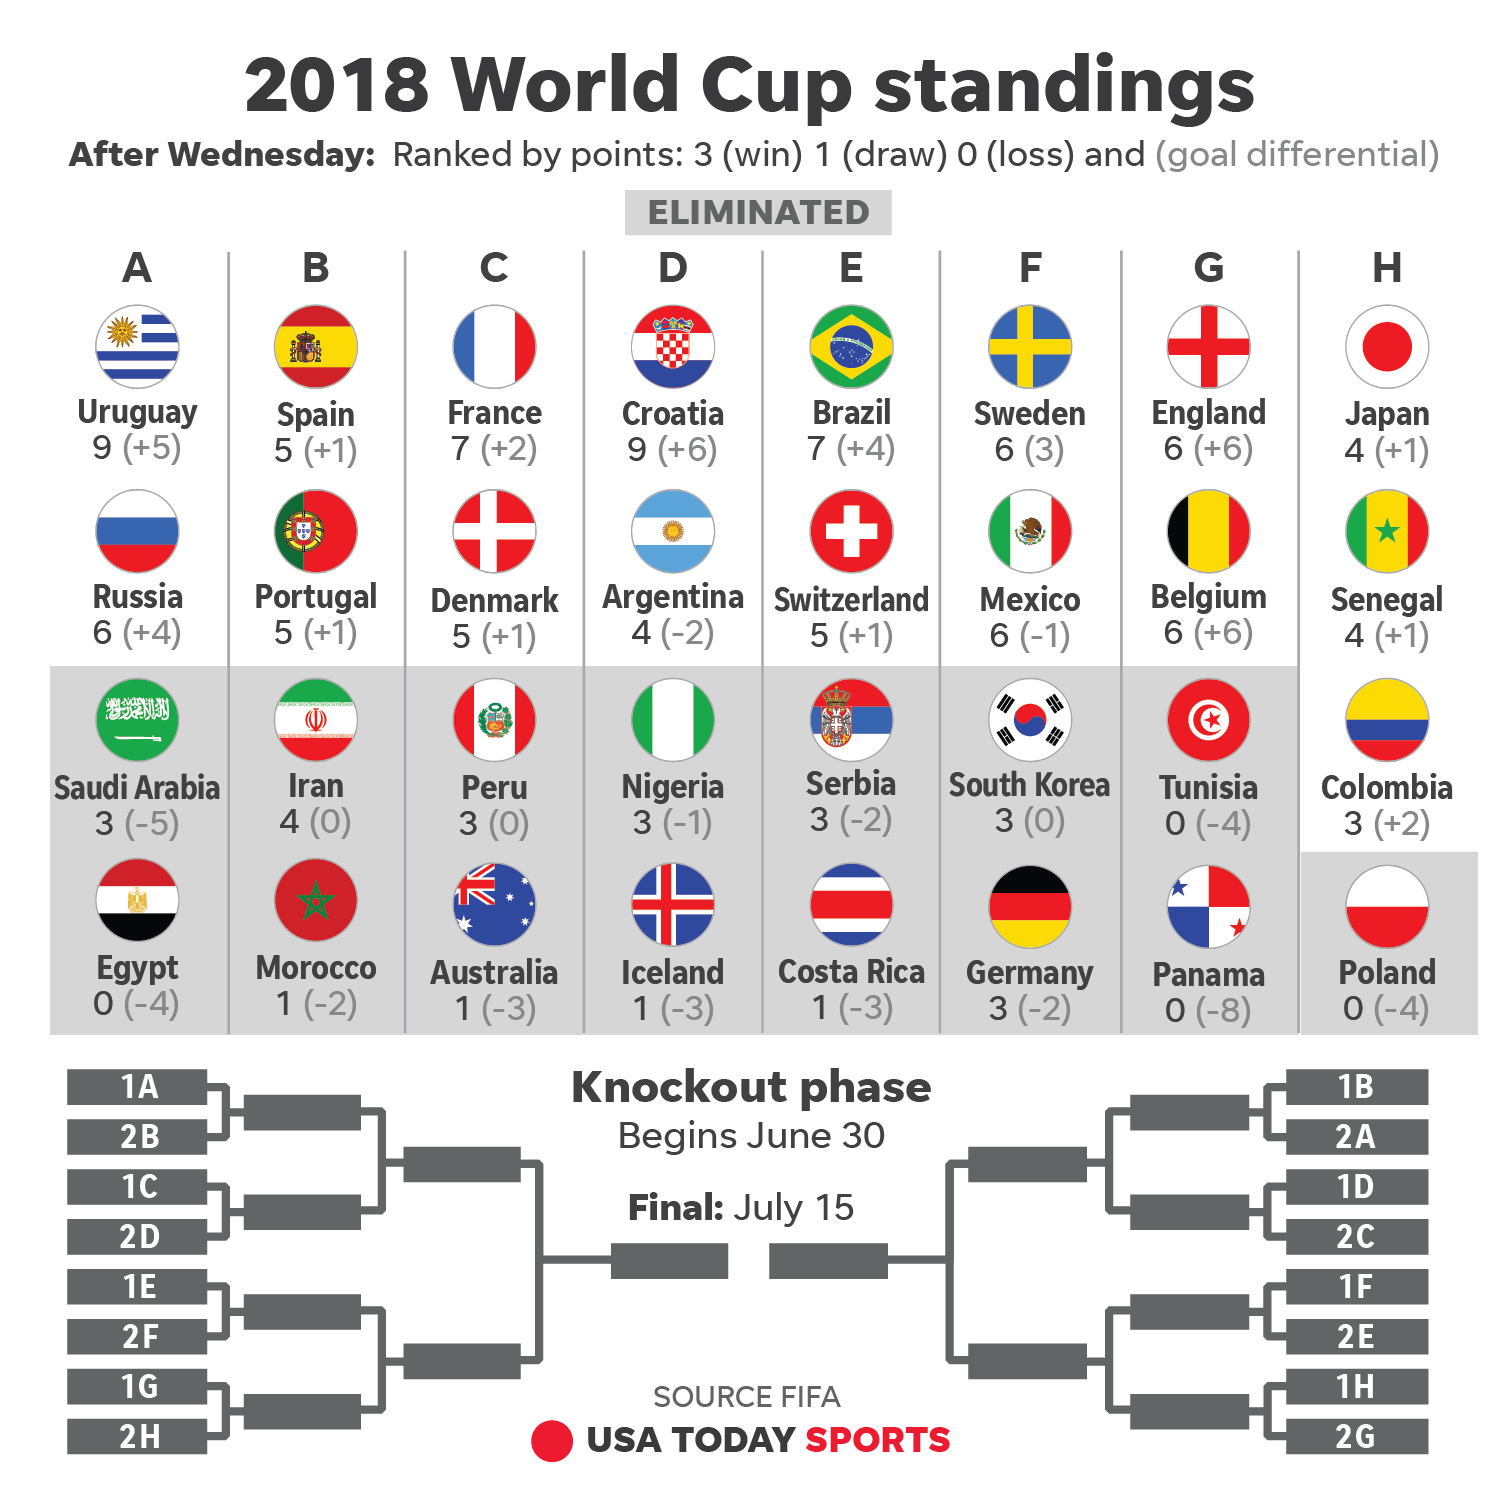 2018 World Cup: How to watch, schedule, stories for Thursday, June 28